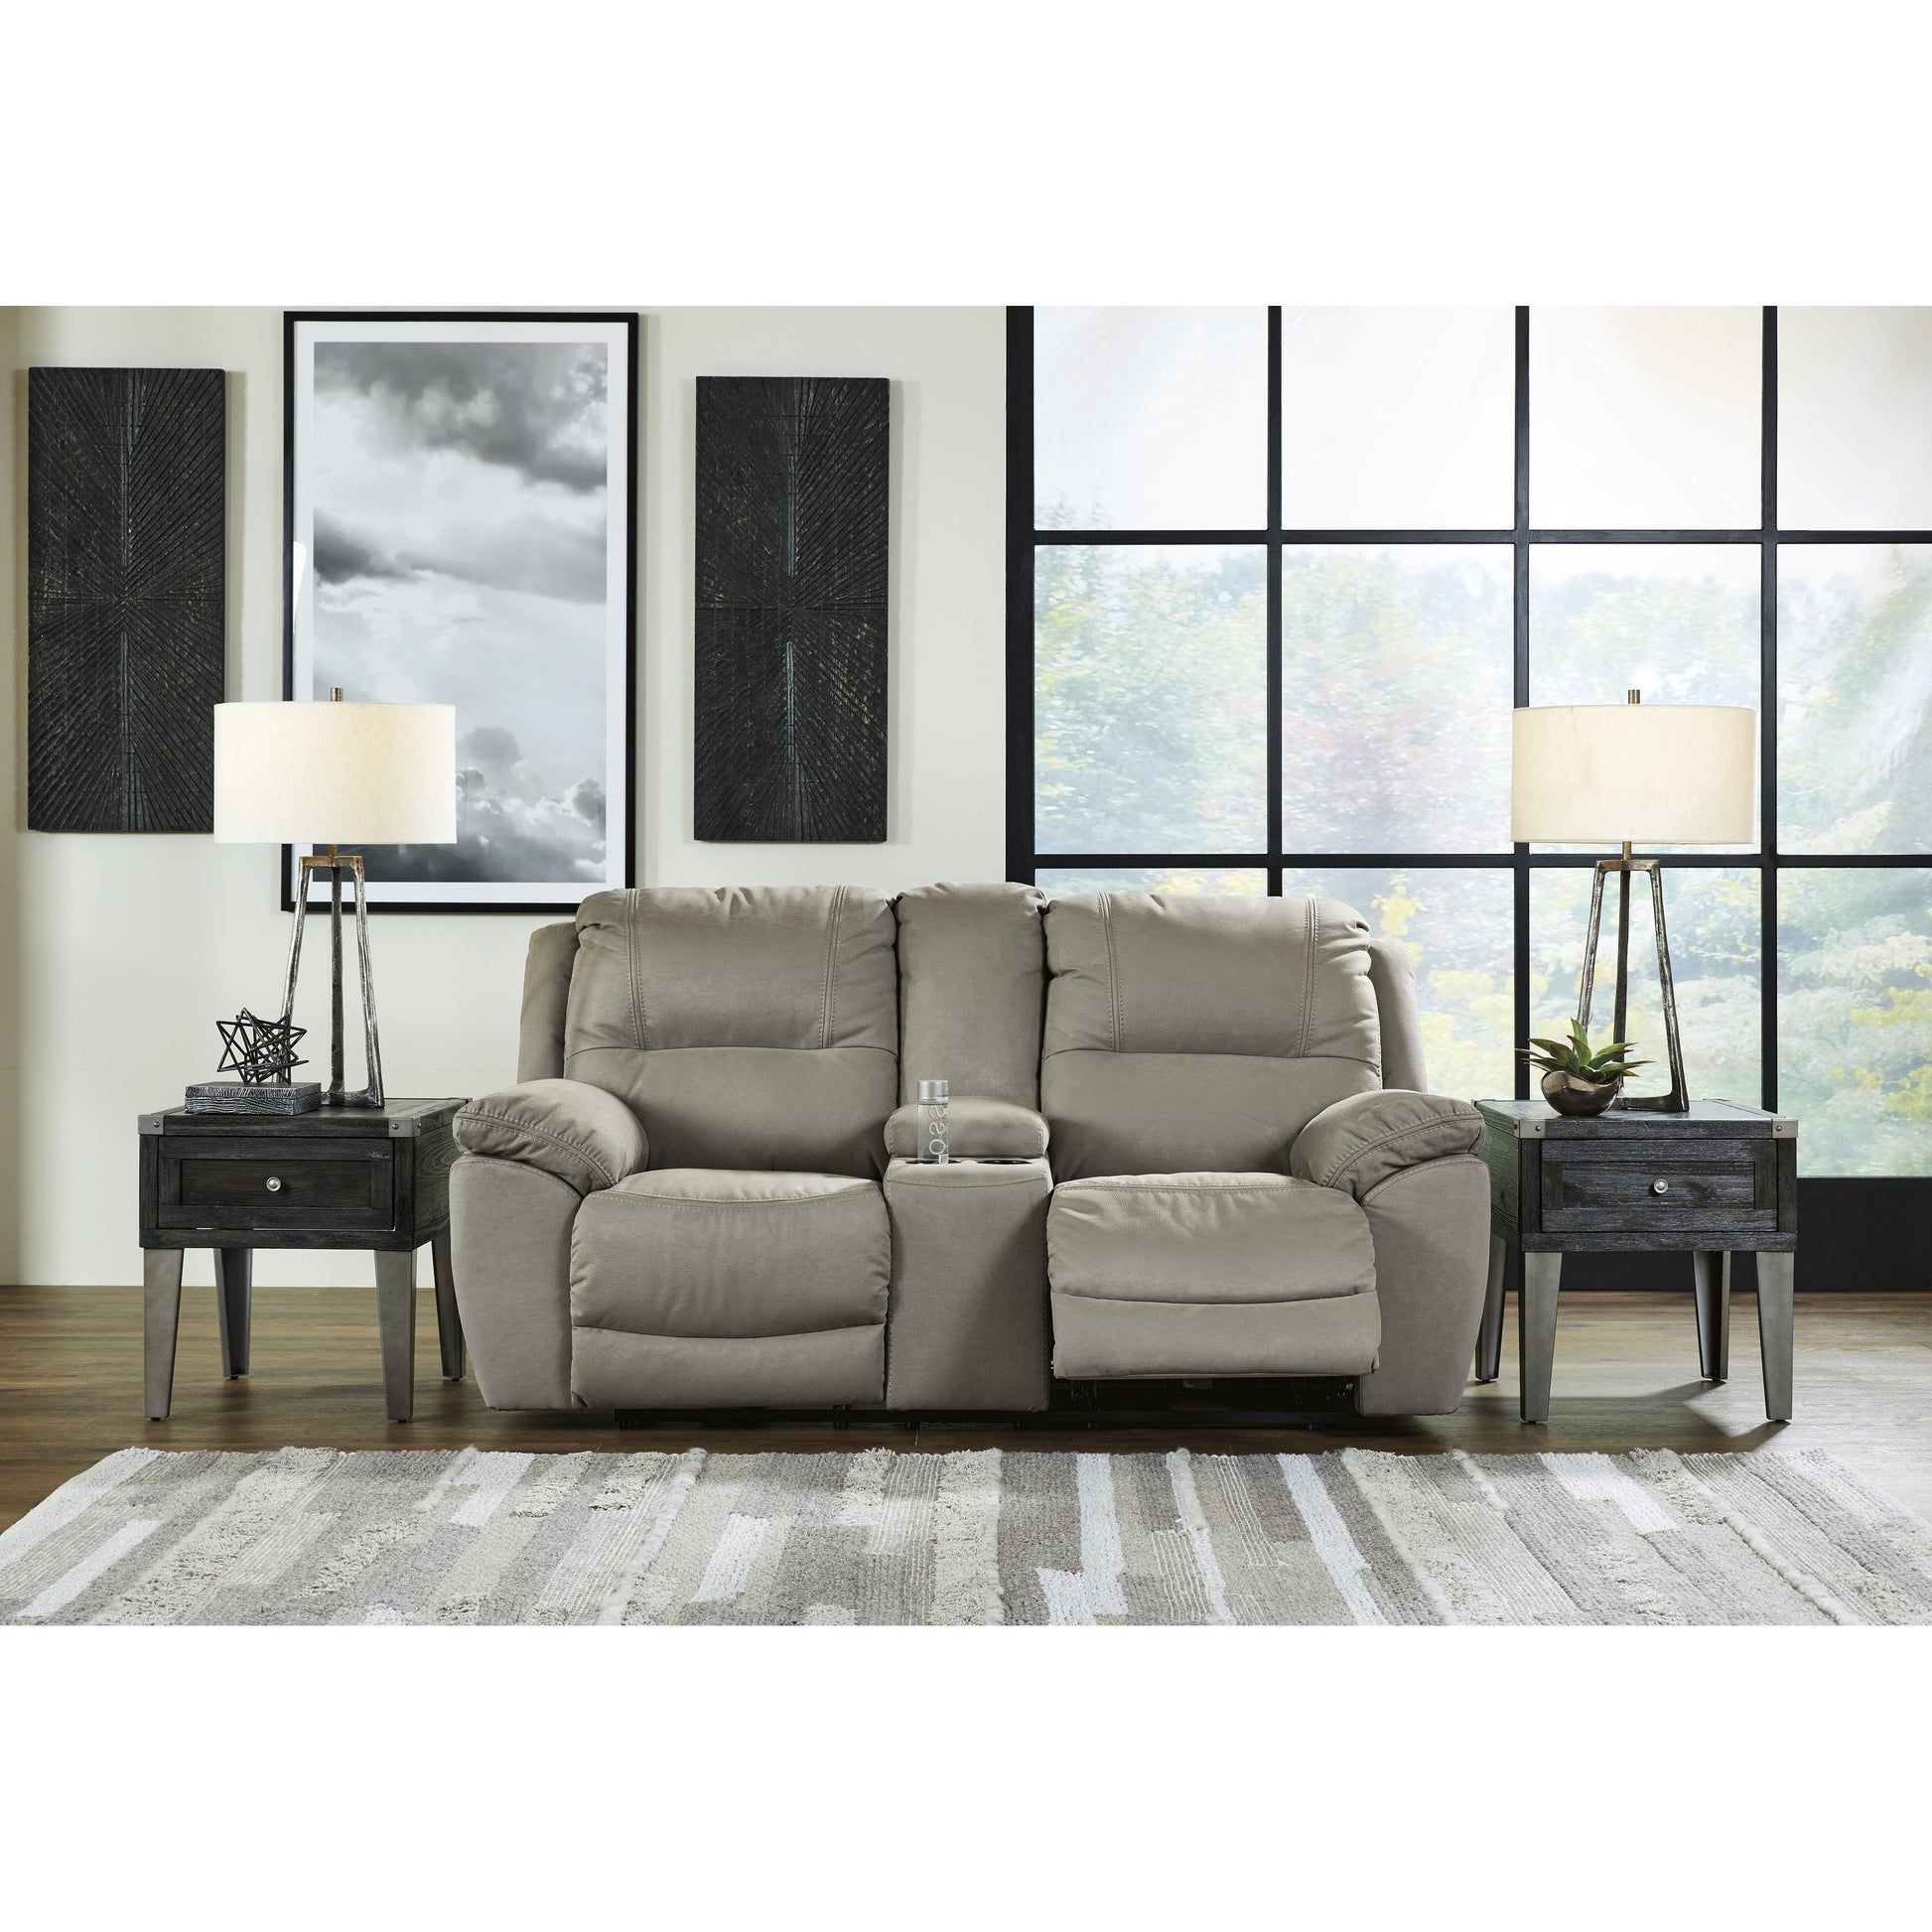 Signature Design by Ashley Next-Gen Gaucho Reclining Leather Look Loveseat 5420394 IMAGE 5